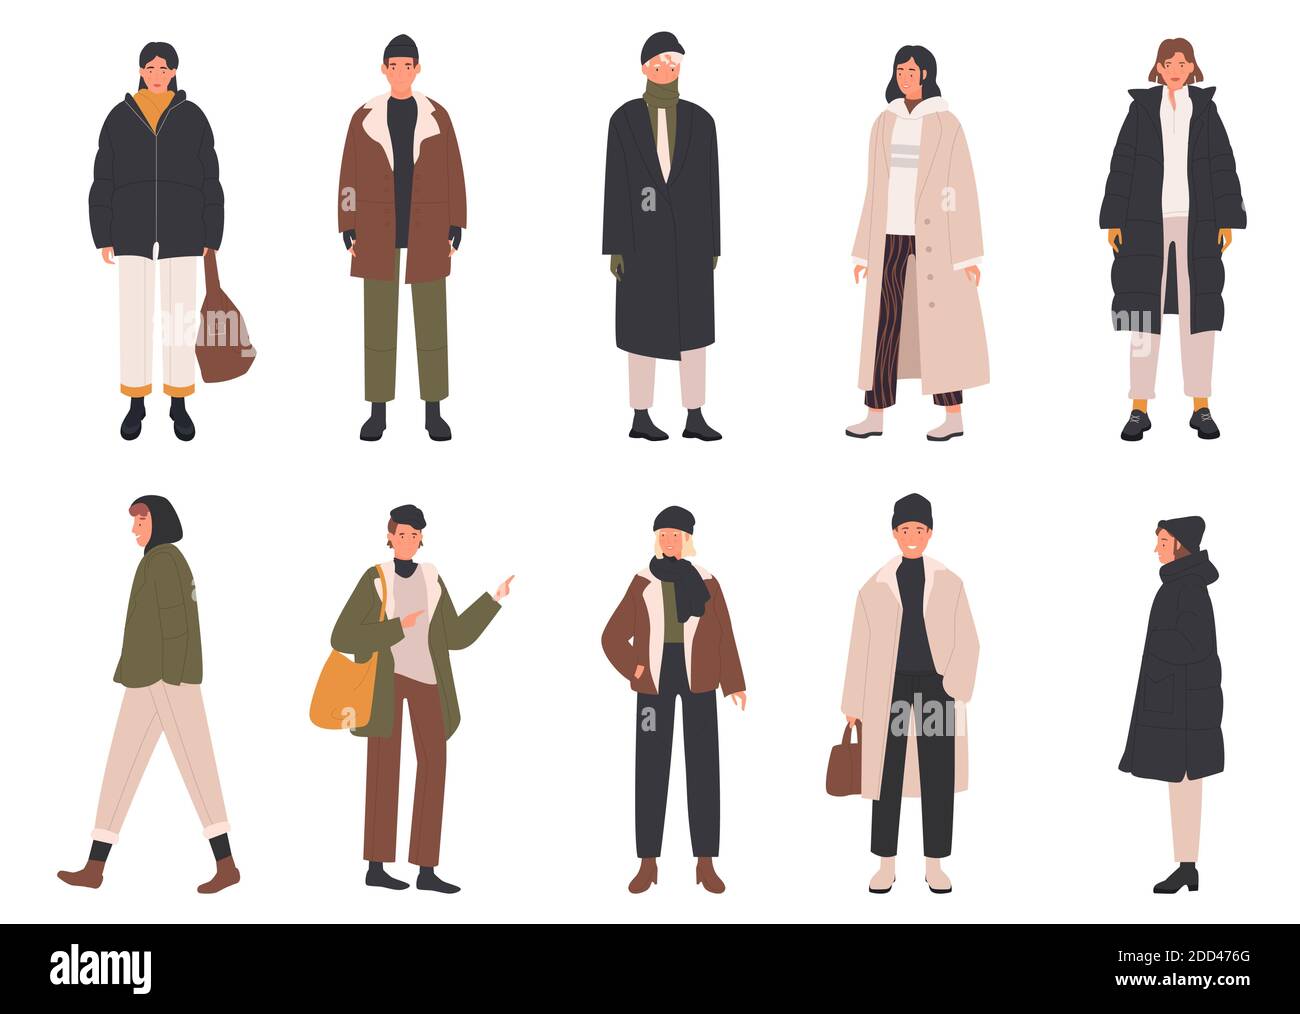 People wear winter clothes vector illustration set. Cartoon man woman characters wearing different winter seasonal clothing, stylish warm coat or trendy suit, young and old models isolated on white Stock Vector